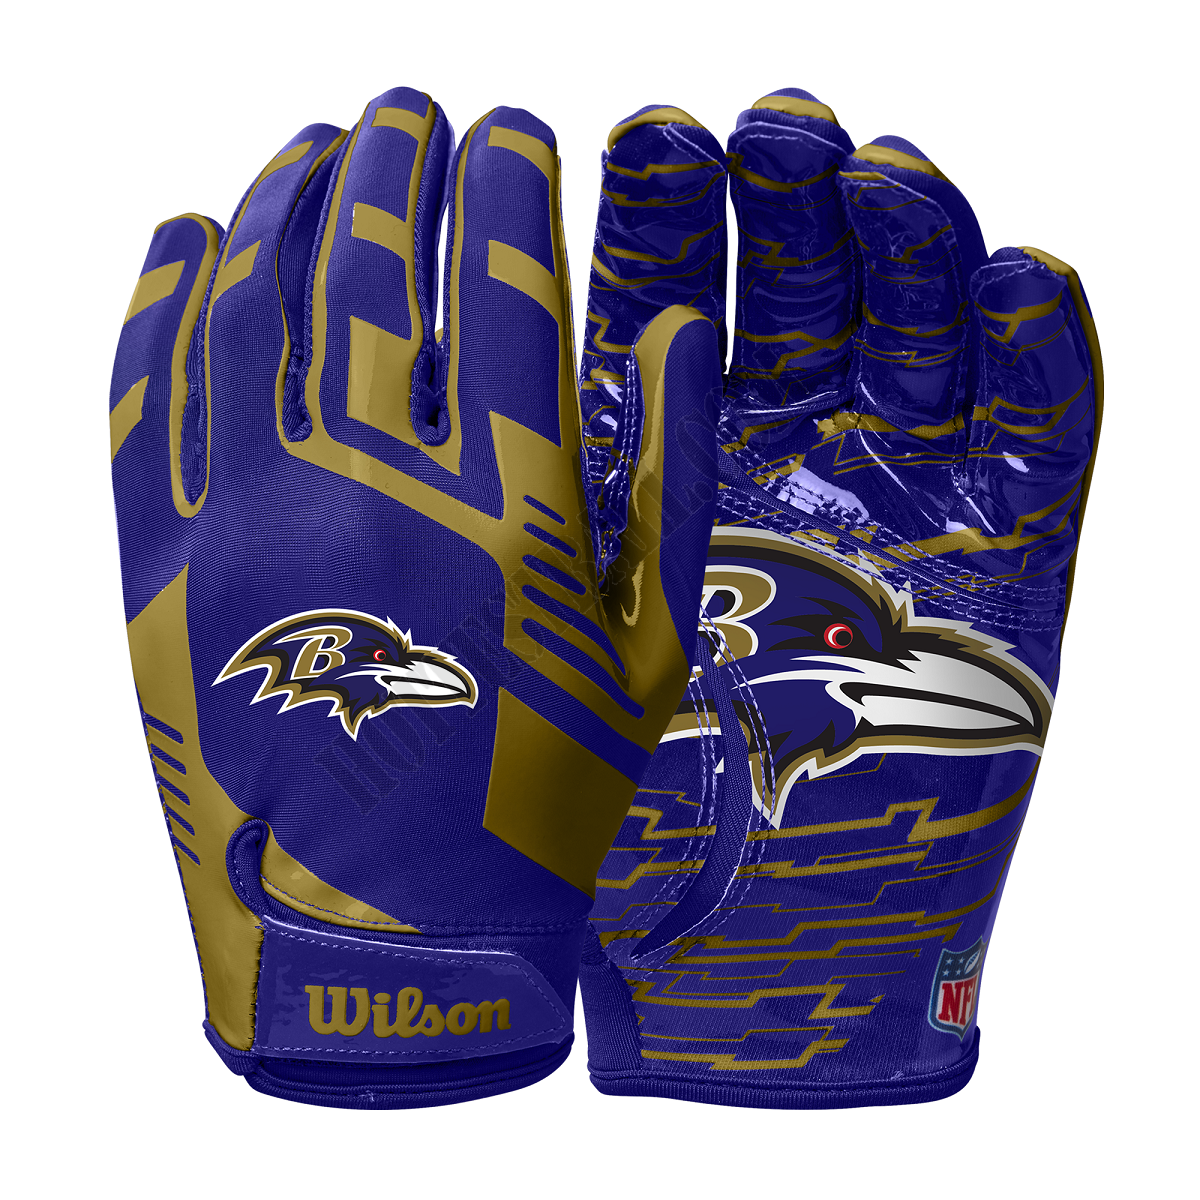 NFL Stretch Fit Receivers Gloves - Baltimore Ravens ● Wilson Promotions - NFL Stretch Fit Receivers Gloves - Baltimore Ravens ● Wilson Promotions